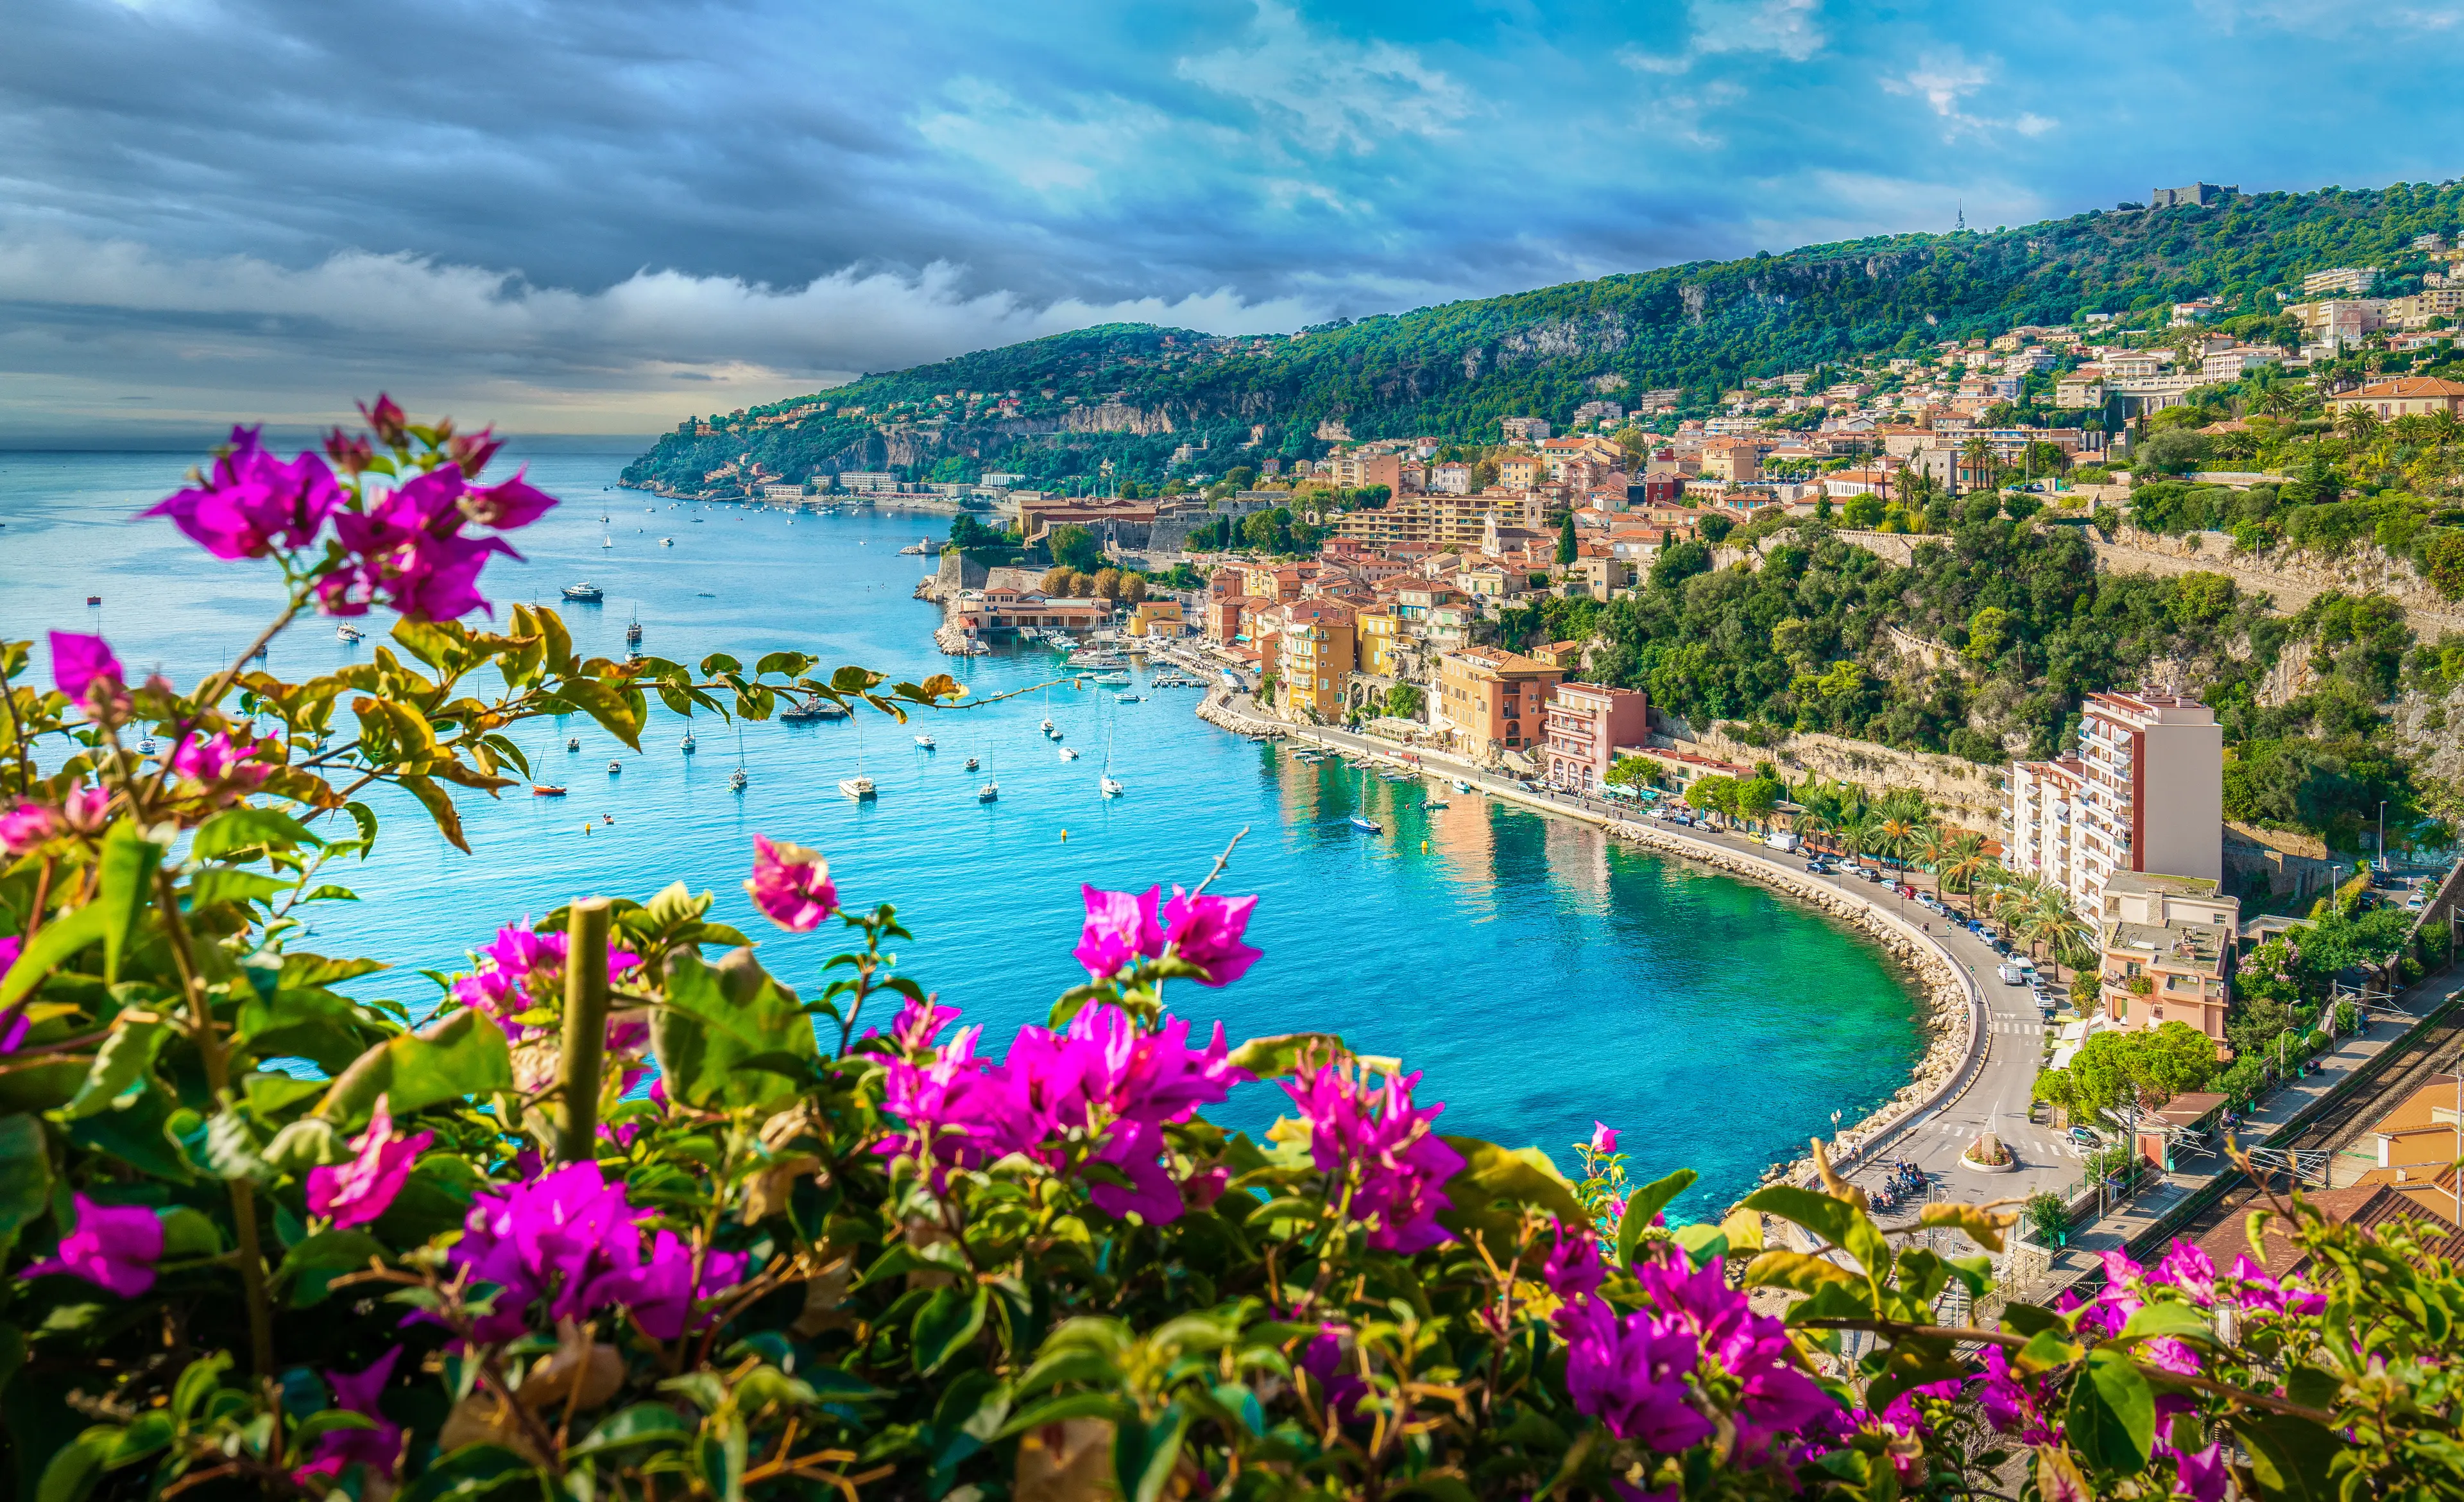 French Riviera coast with medieval town Villefranche sur Mer